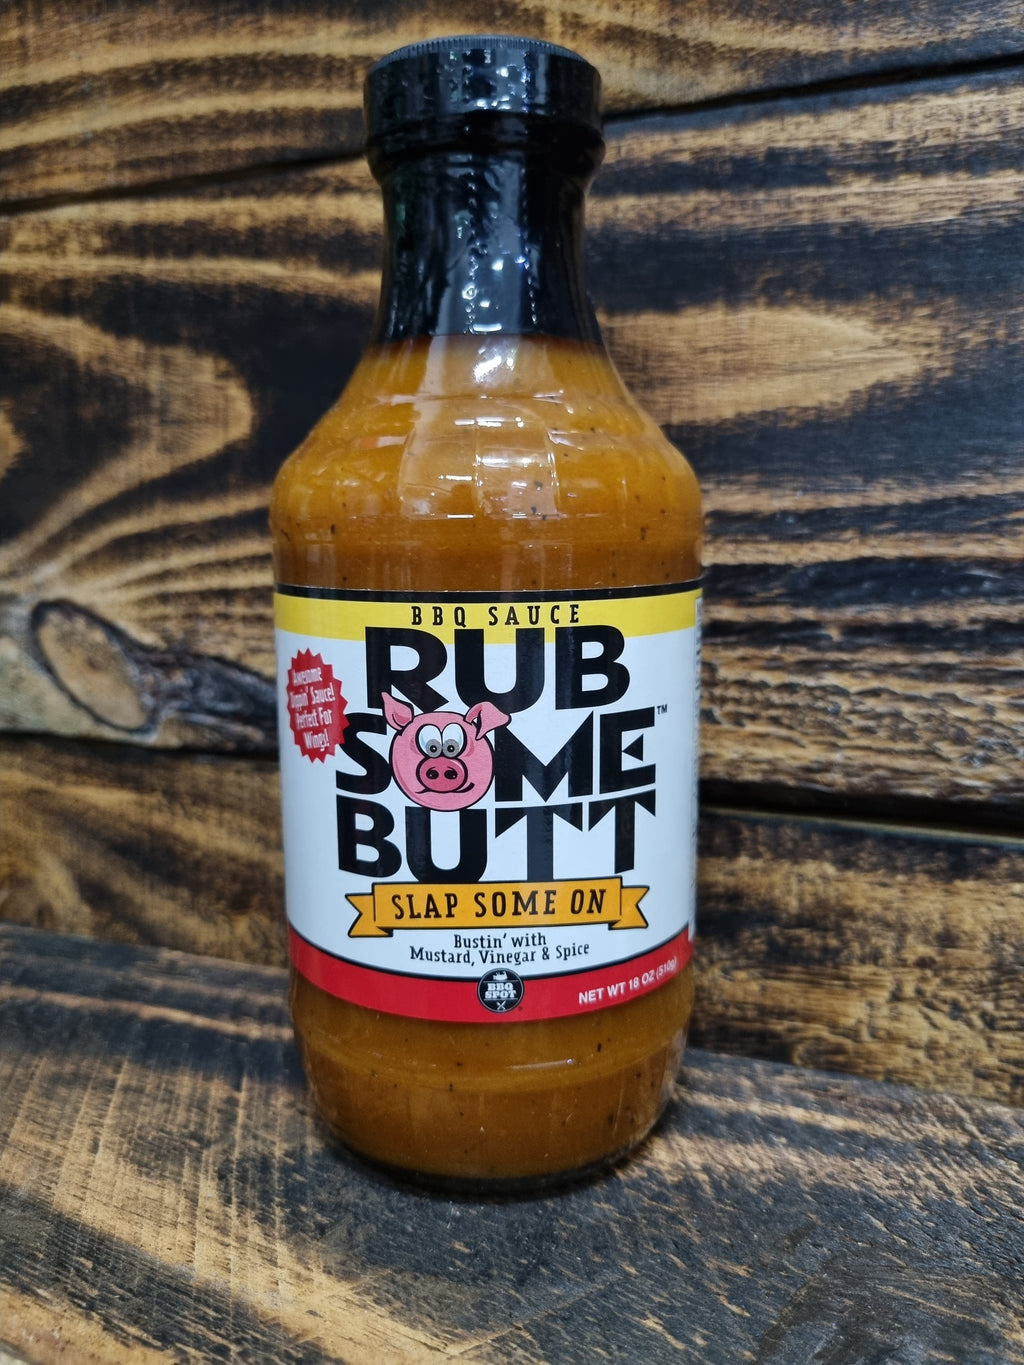 Slap Some on by Rub Some Butt 510g